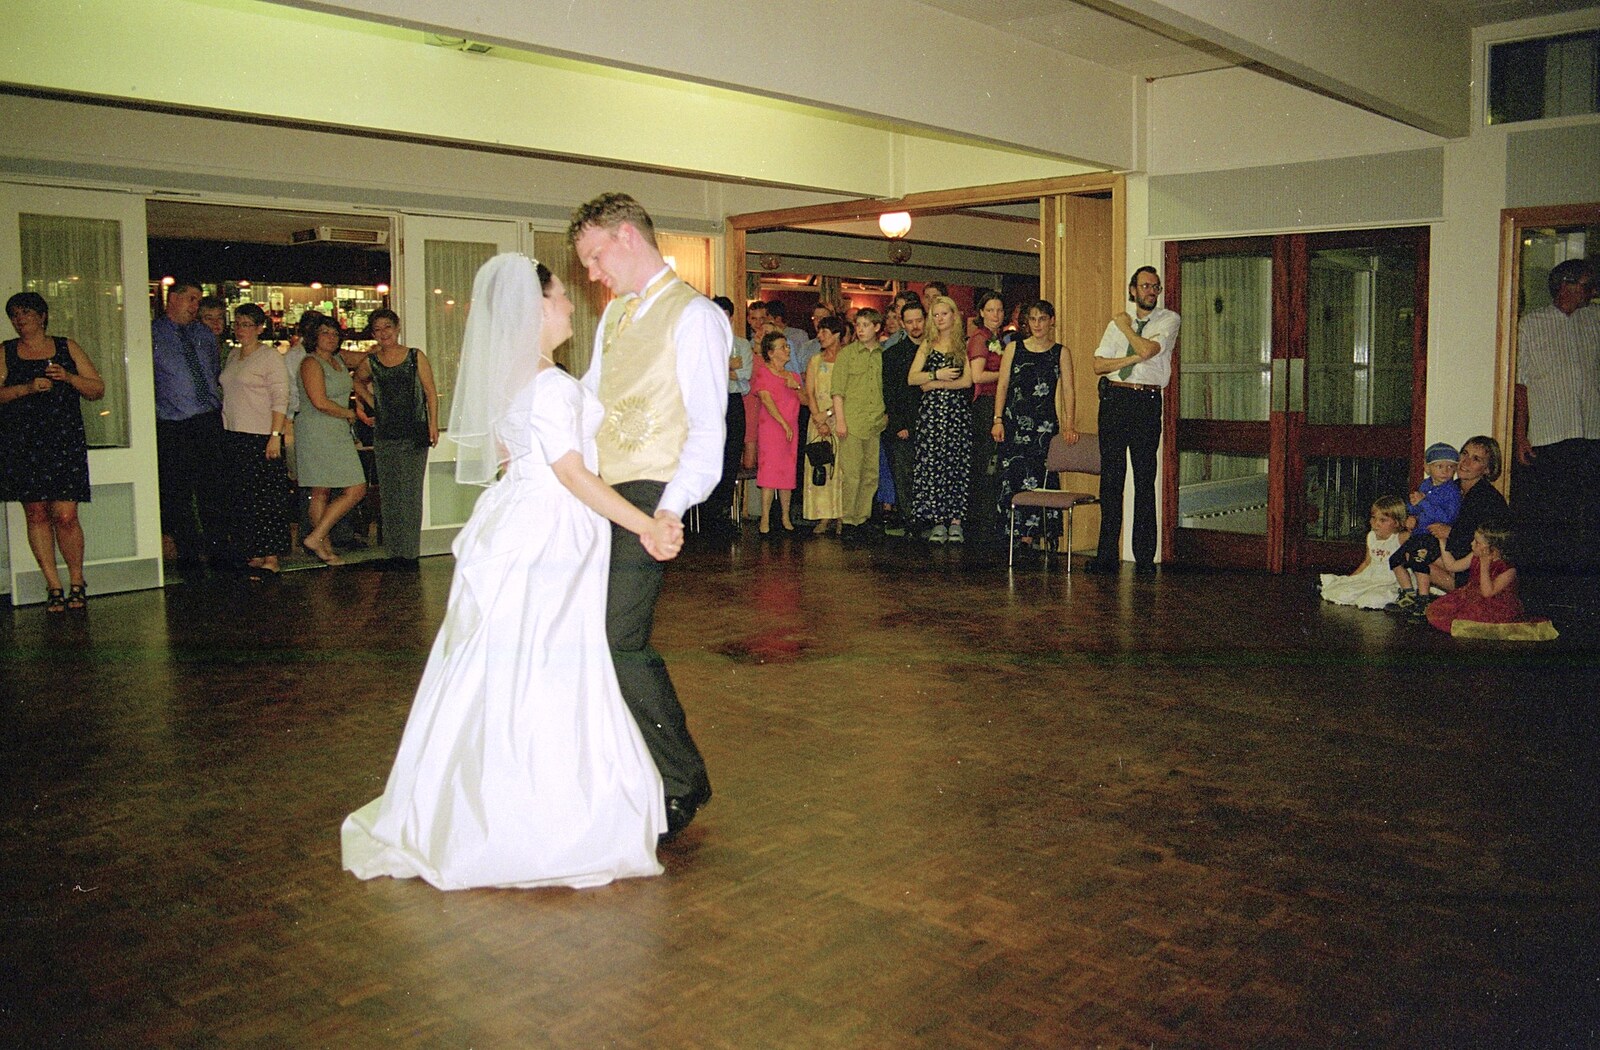 Joe and Lesley and the first dance from Joe and Lesley's CISU Wedding, Ipswich, Suffolk - 30th July 1998